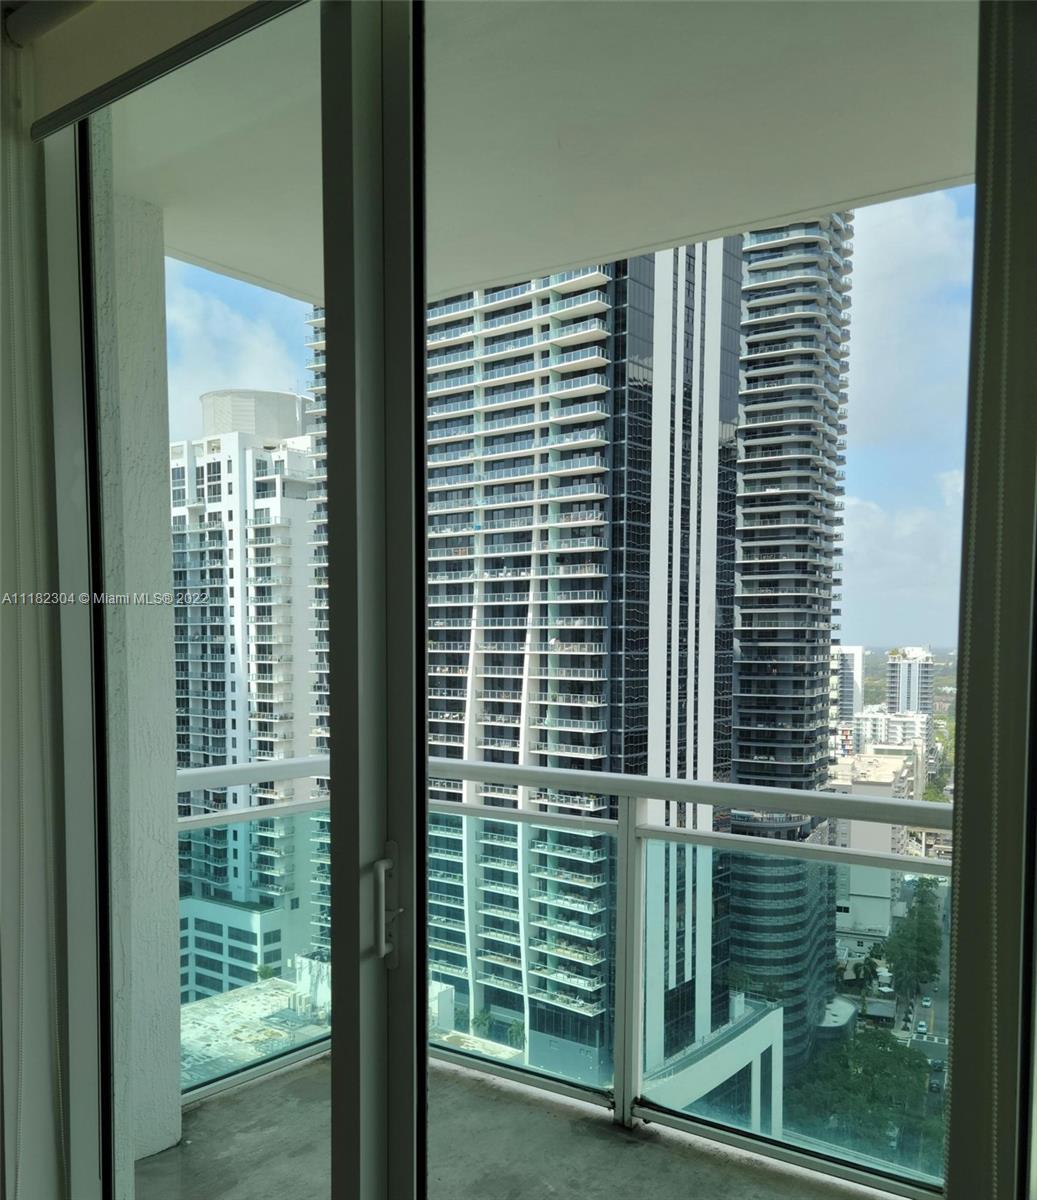 The Plaza on Brickell South image #35